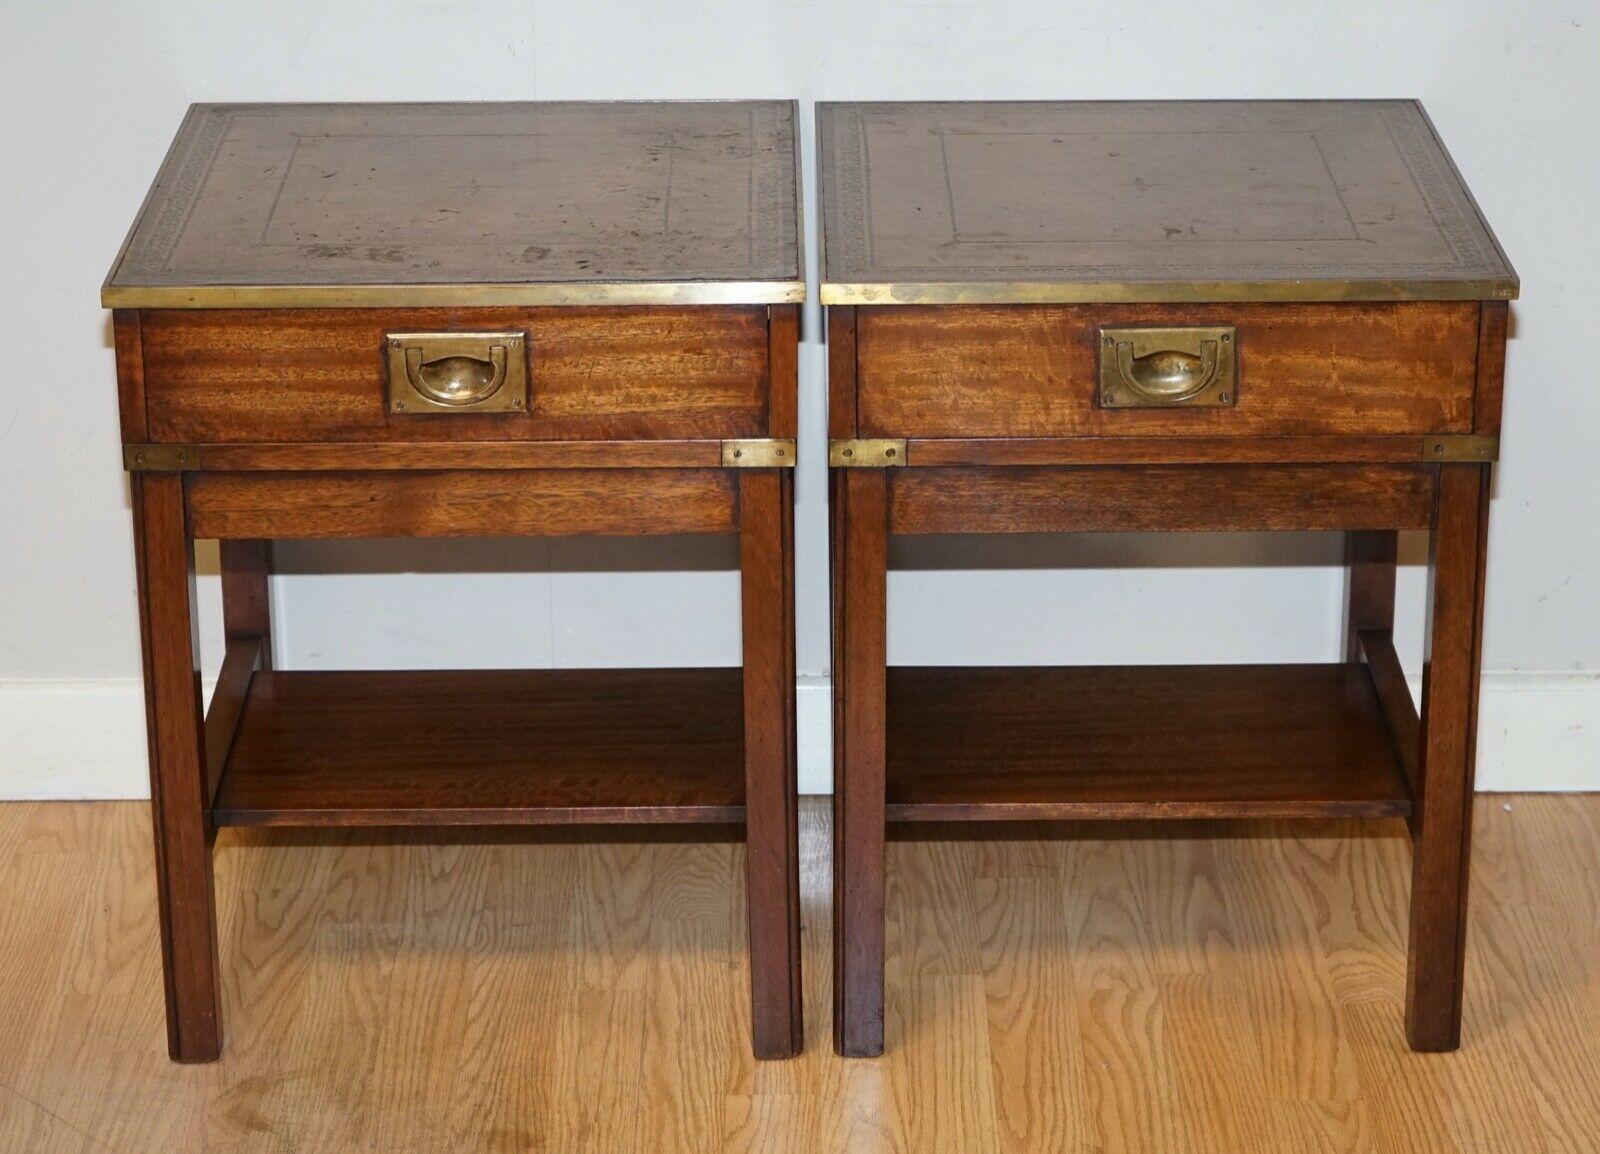 We are delighted to sell this Lovely Pair of Military Campaign Bedside Tables.

As you will be able to see the leather is not new, over the years it has a built a very unique vintage look.
We have lightly restored this by giving it a hand clean